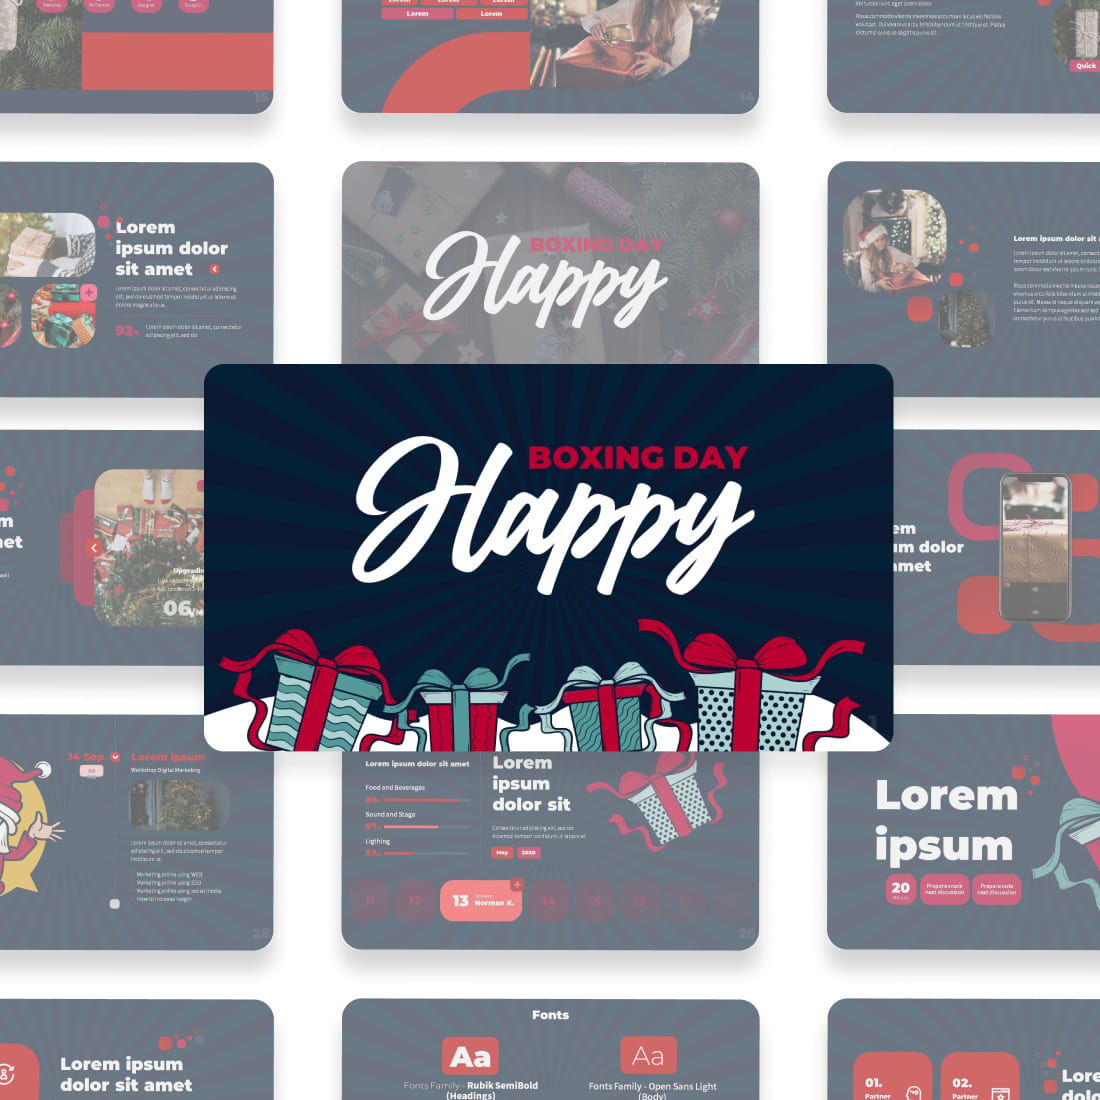 Happy Boxing Day Google Slides Theme cover.